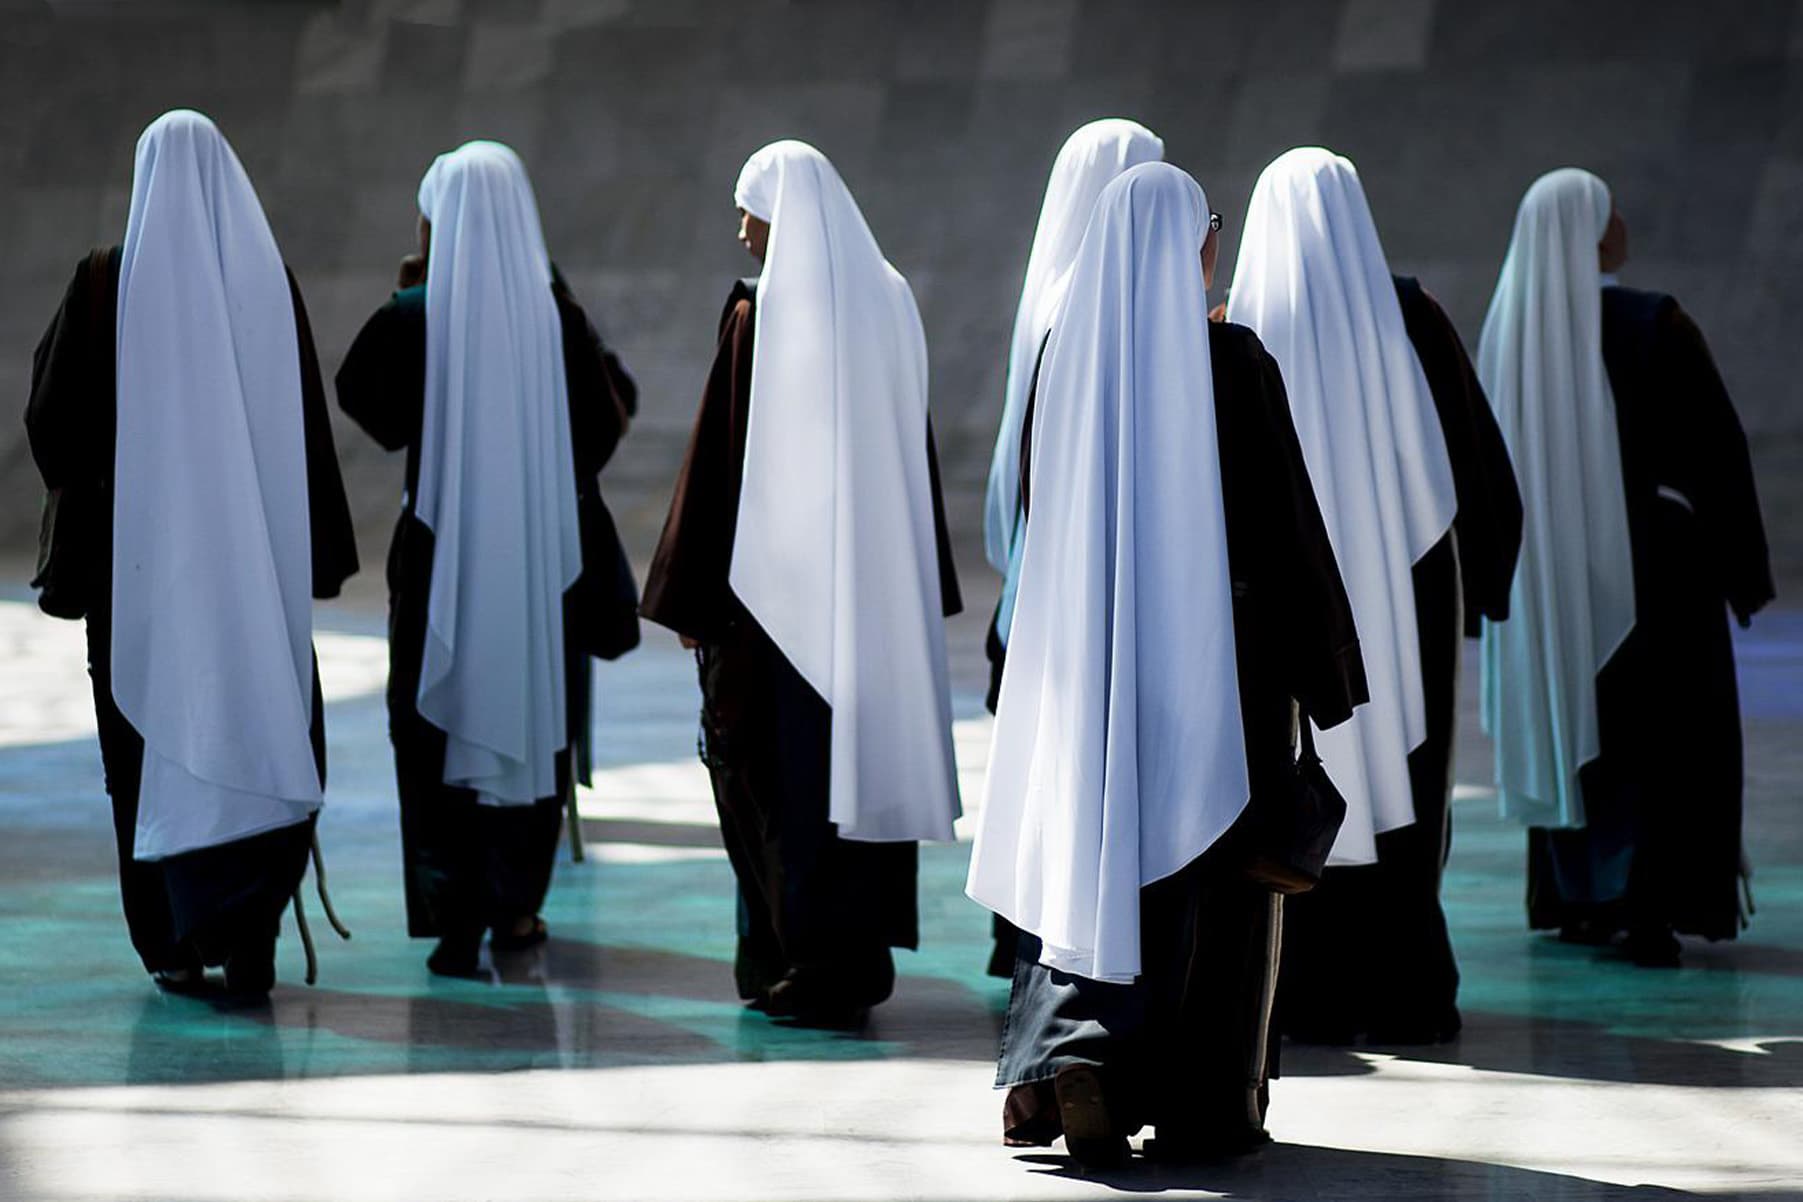 Nuns walking in a group